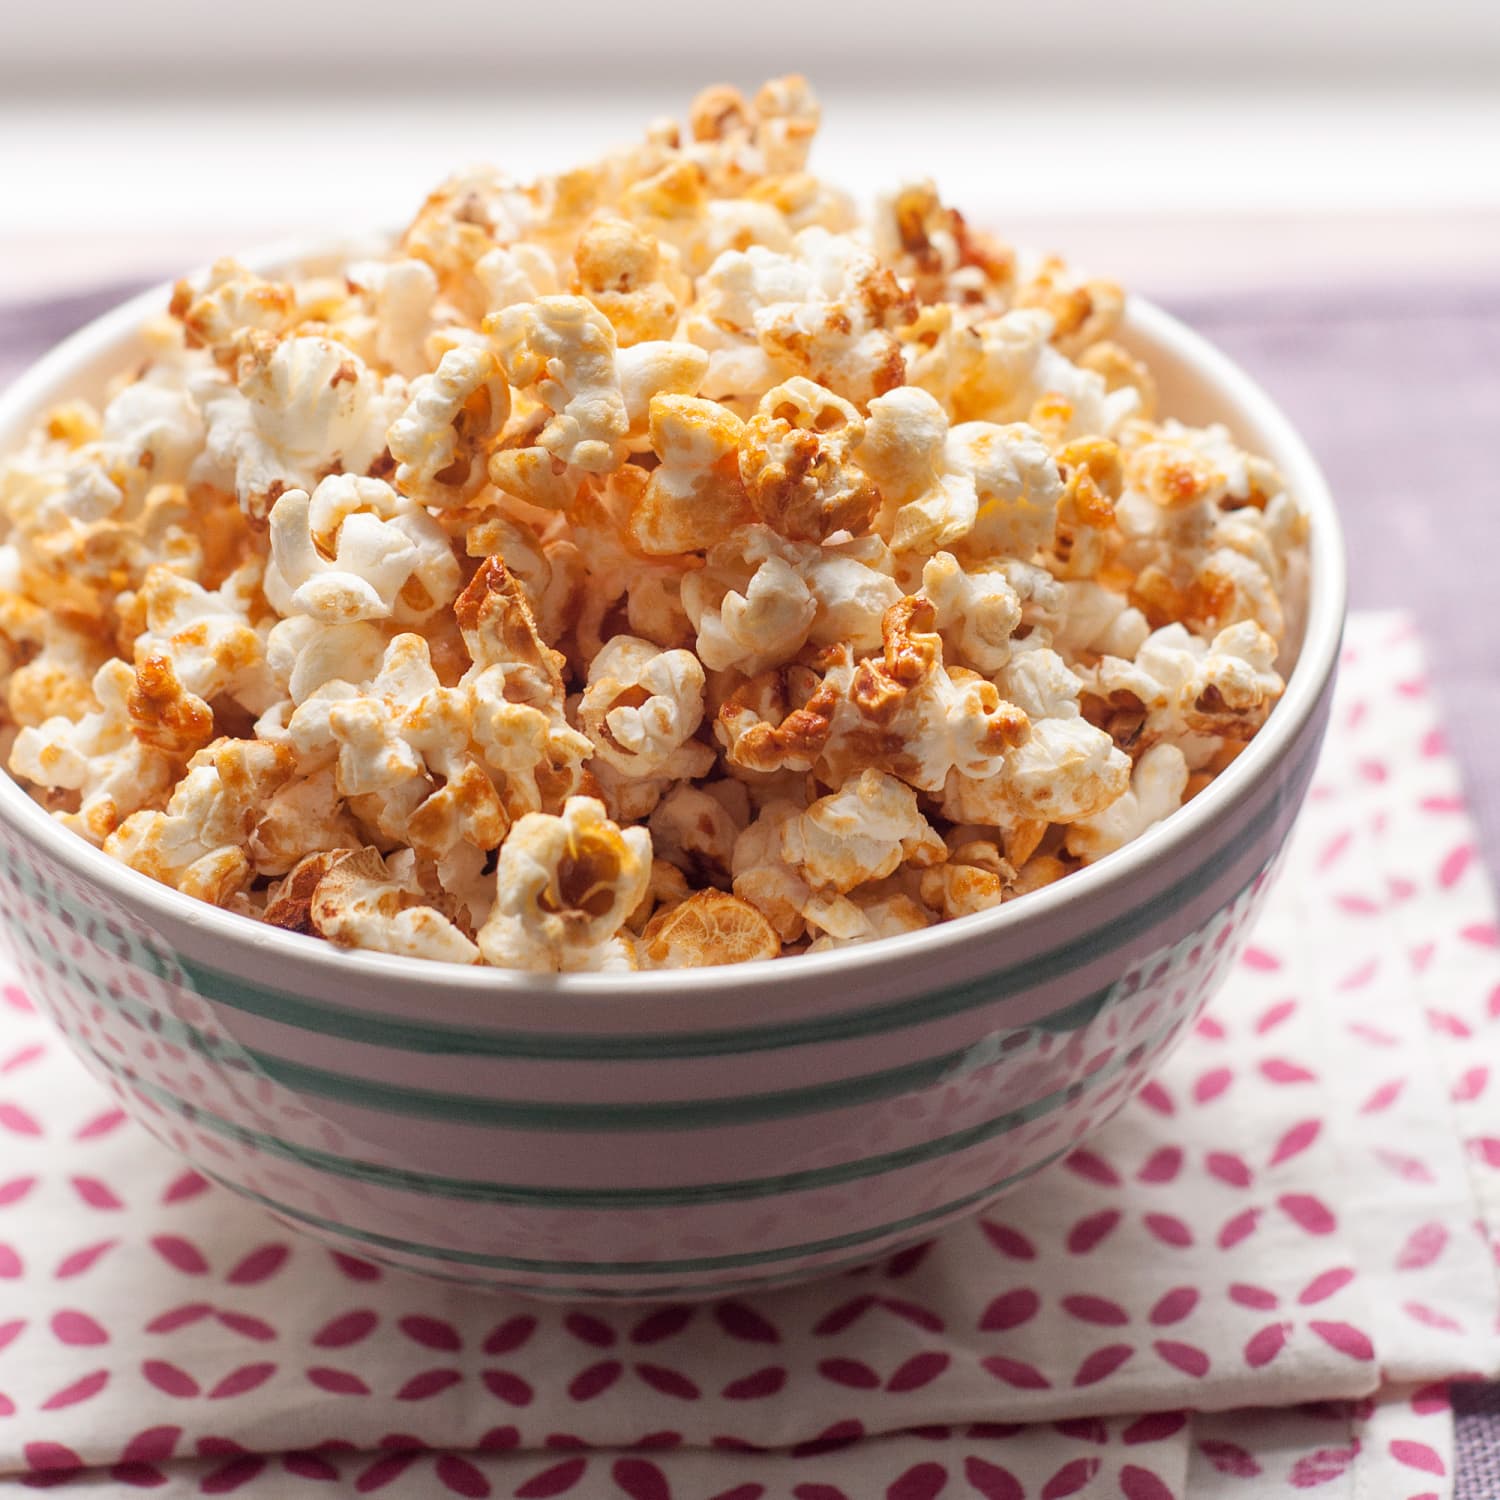 How To Make Kettle Corn at Home | Kitchn